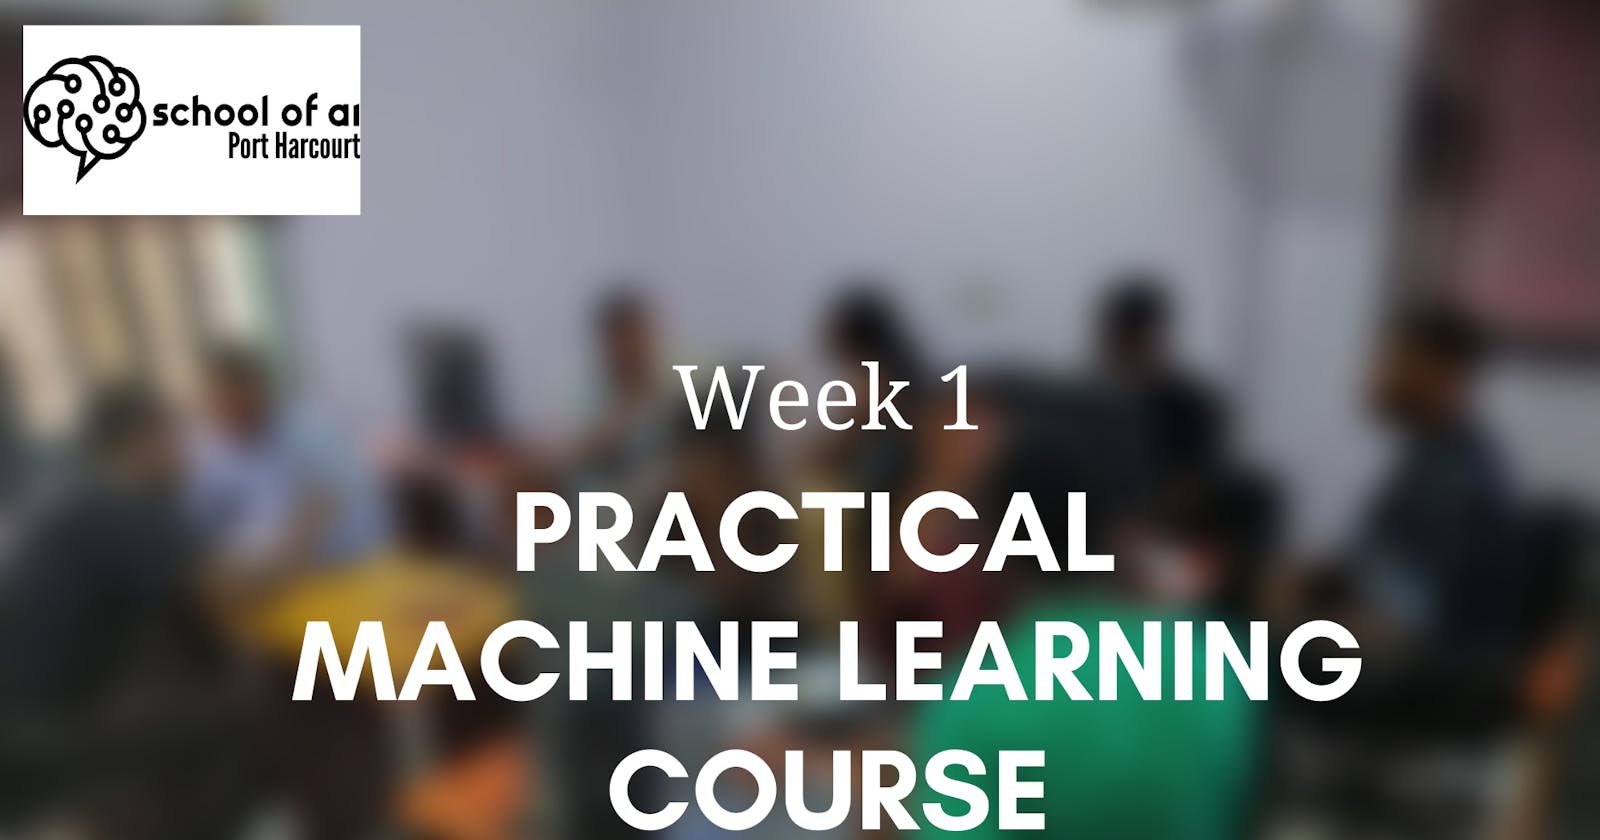 Practical Machine Learning Course Week 1 Highlight; Get Started on Problem-Solving.